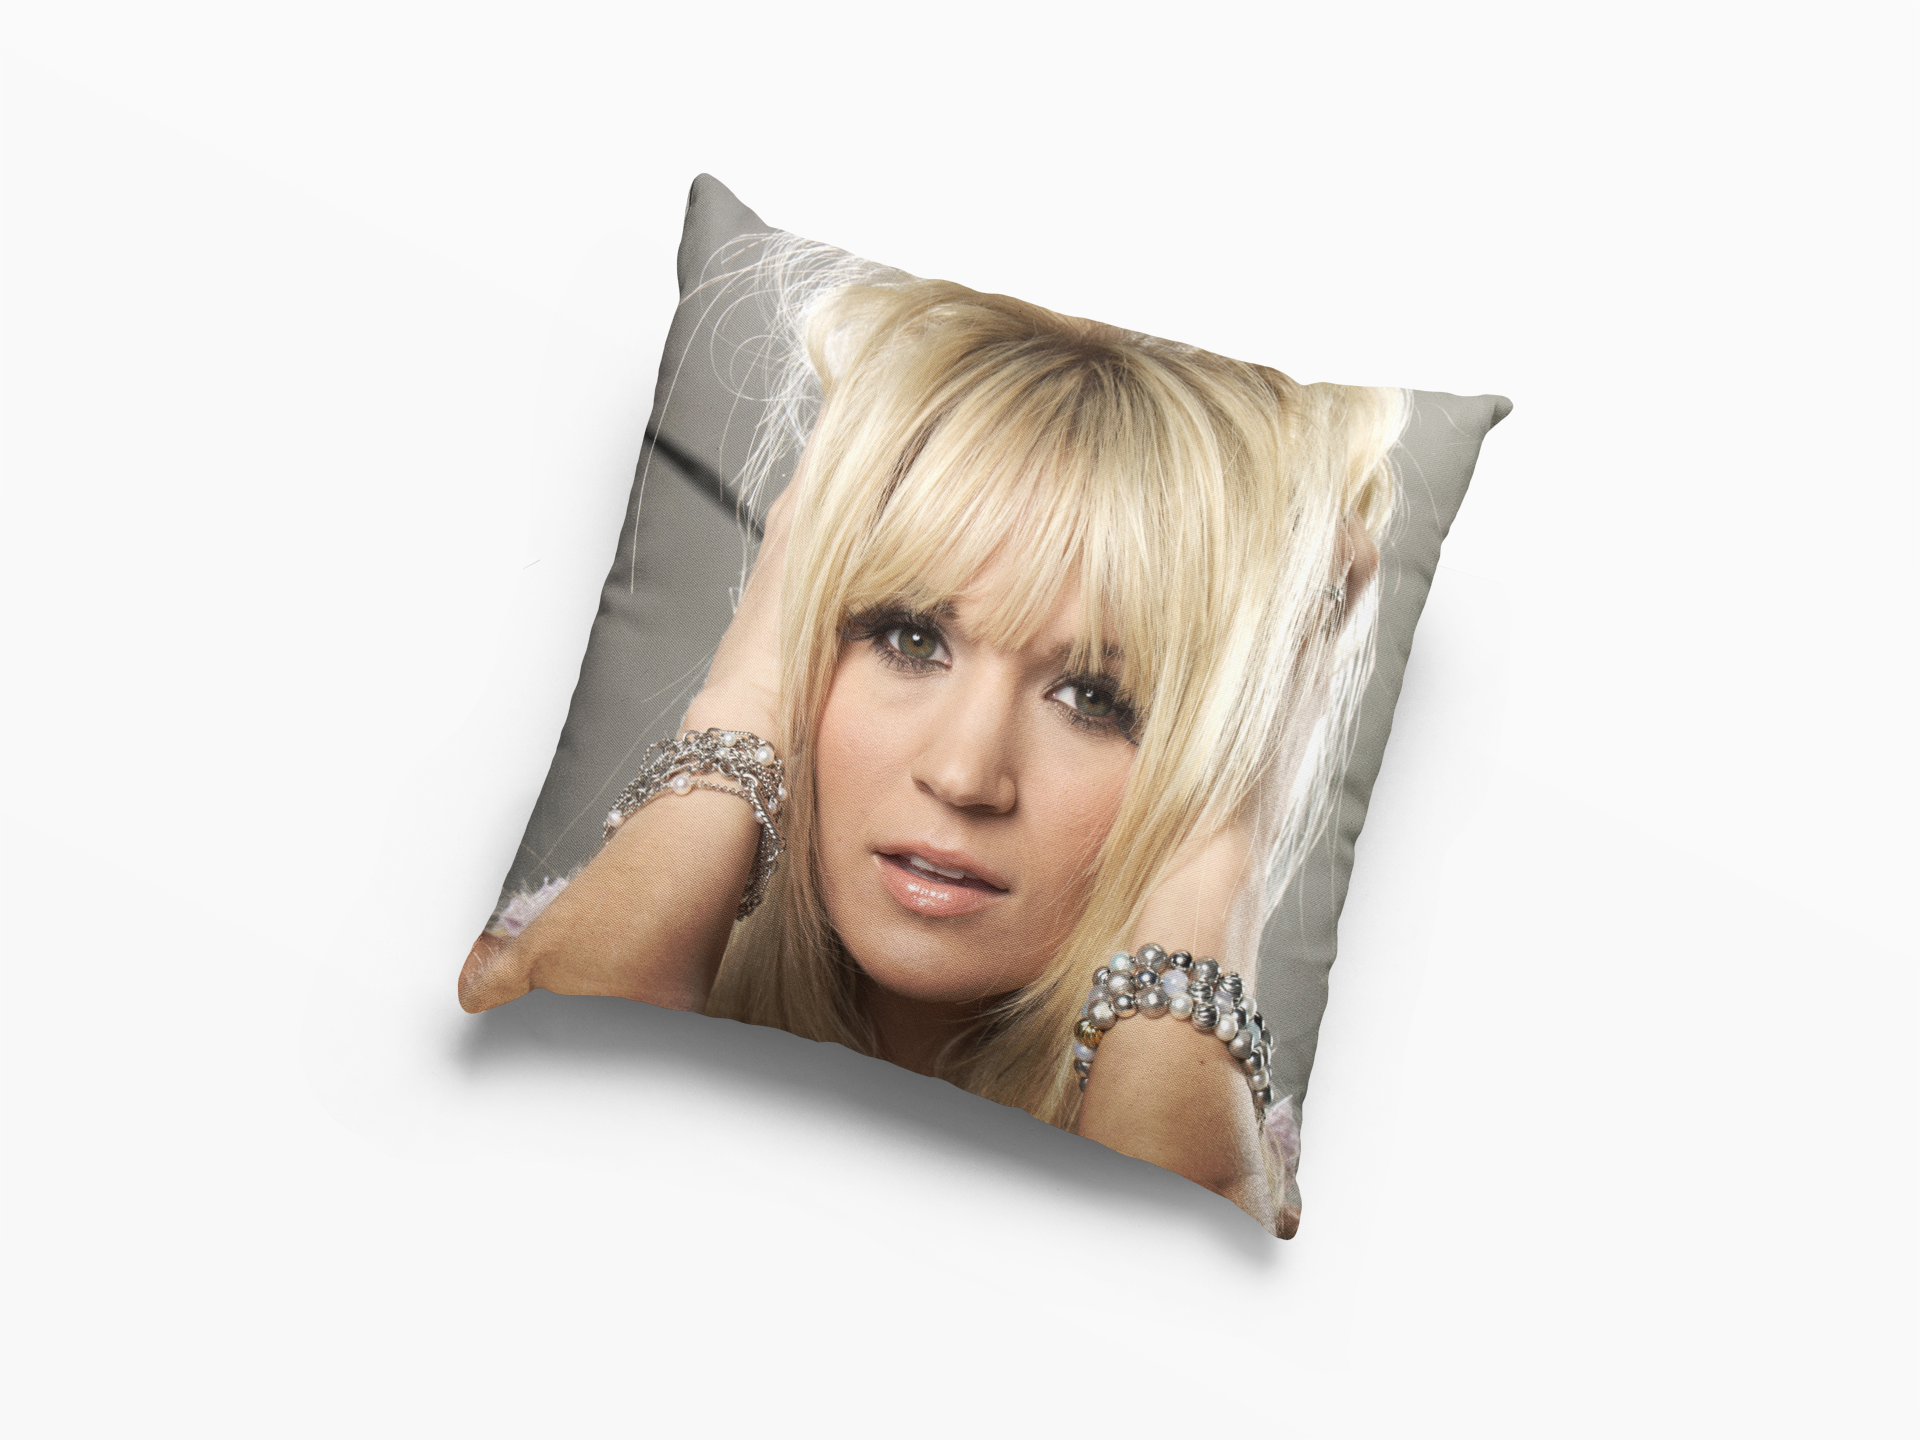 Carrie Underwood Hairstyle Cushion Case / Pillow Case